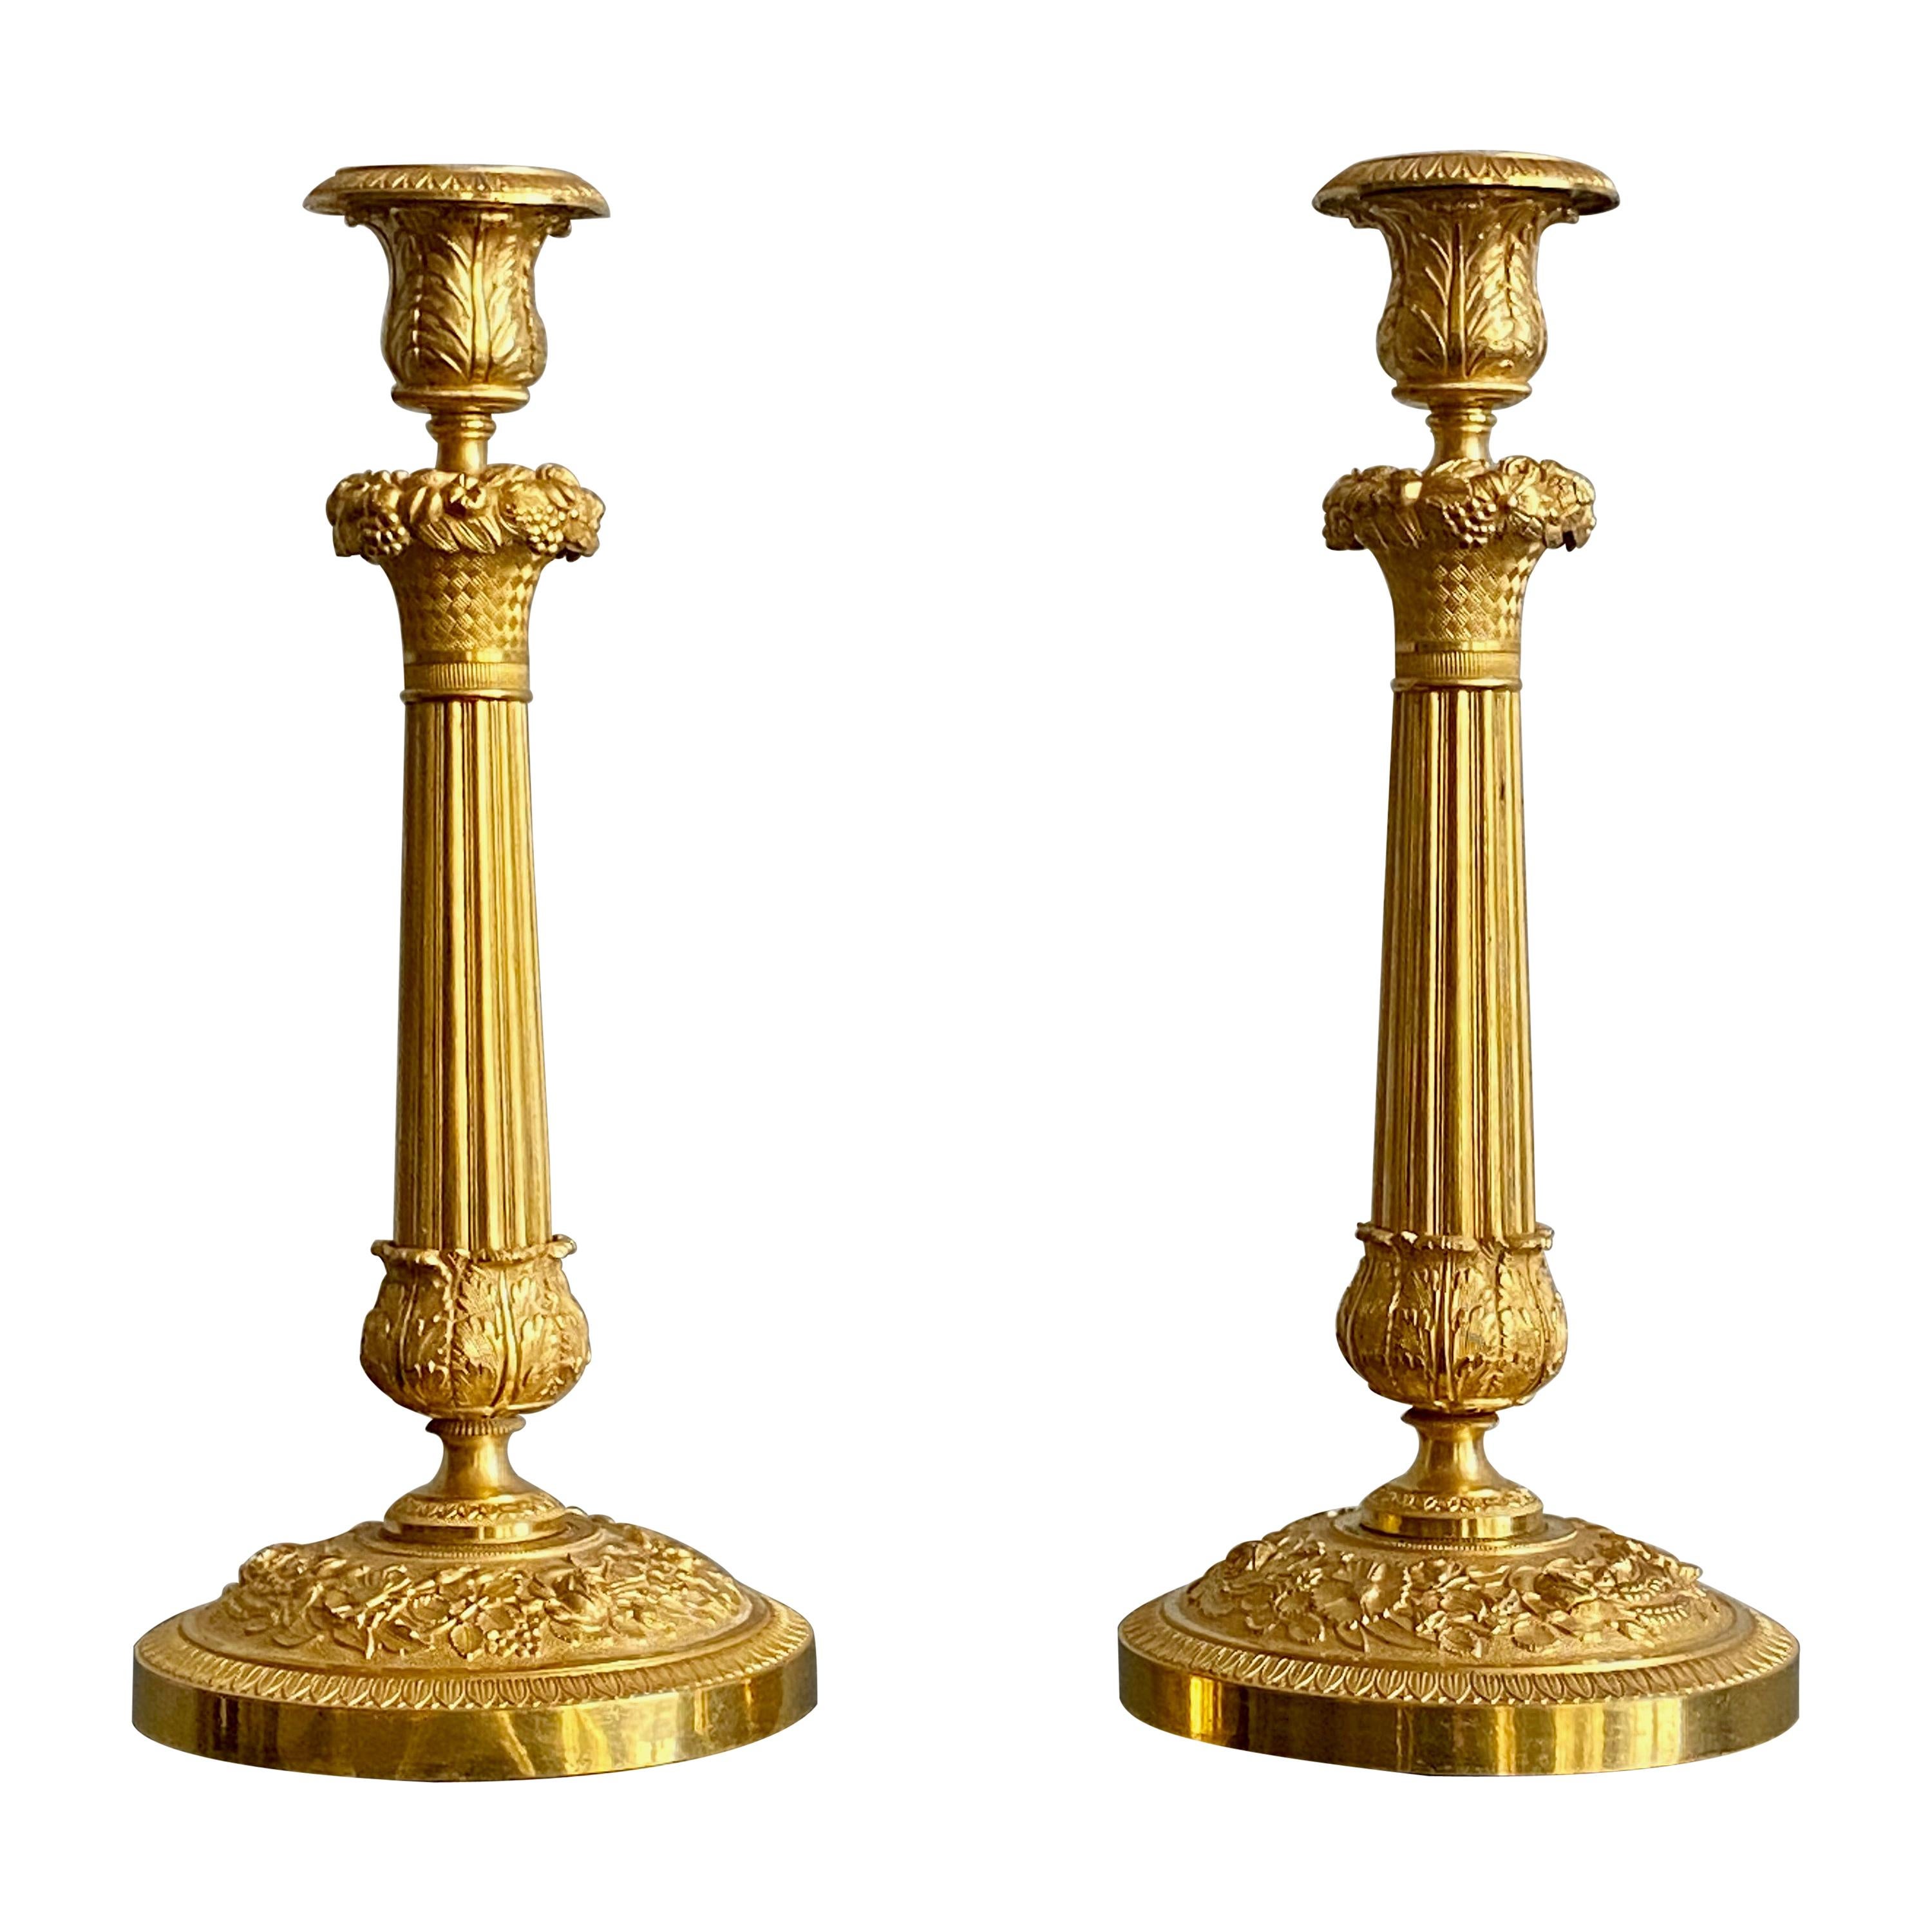 Pair of French Empire Gilt Bronze Candle Sticks